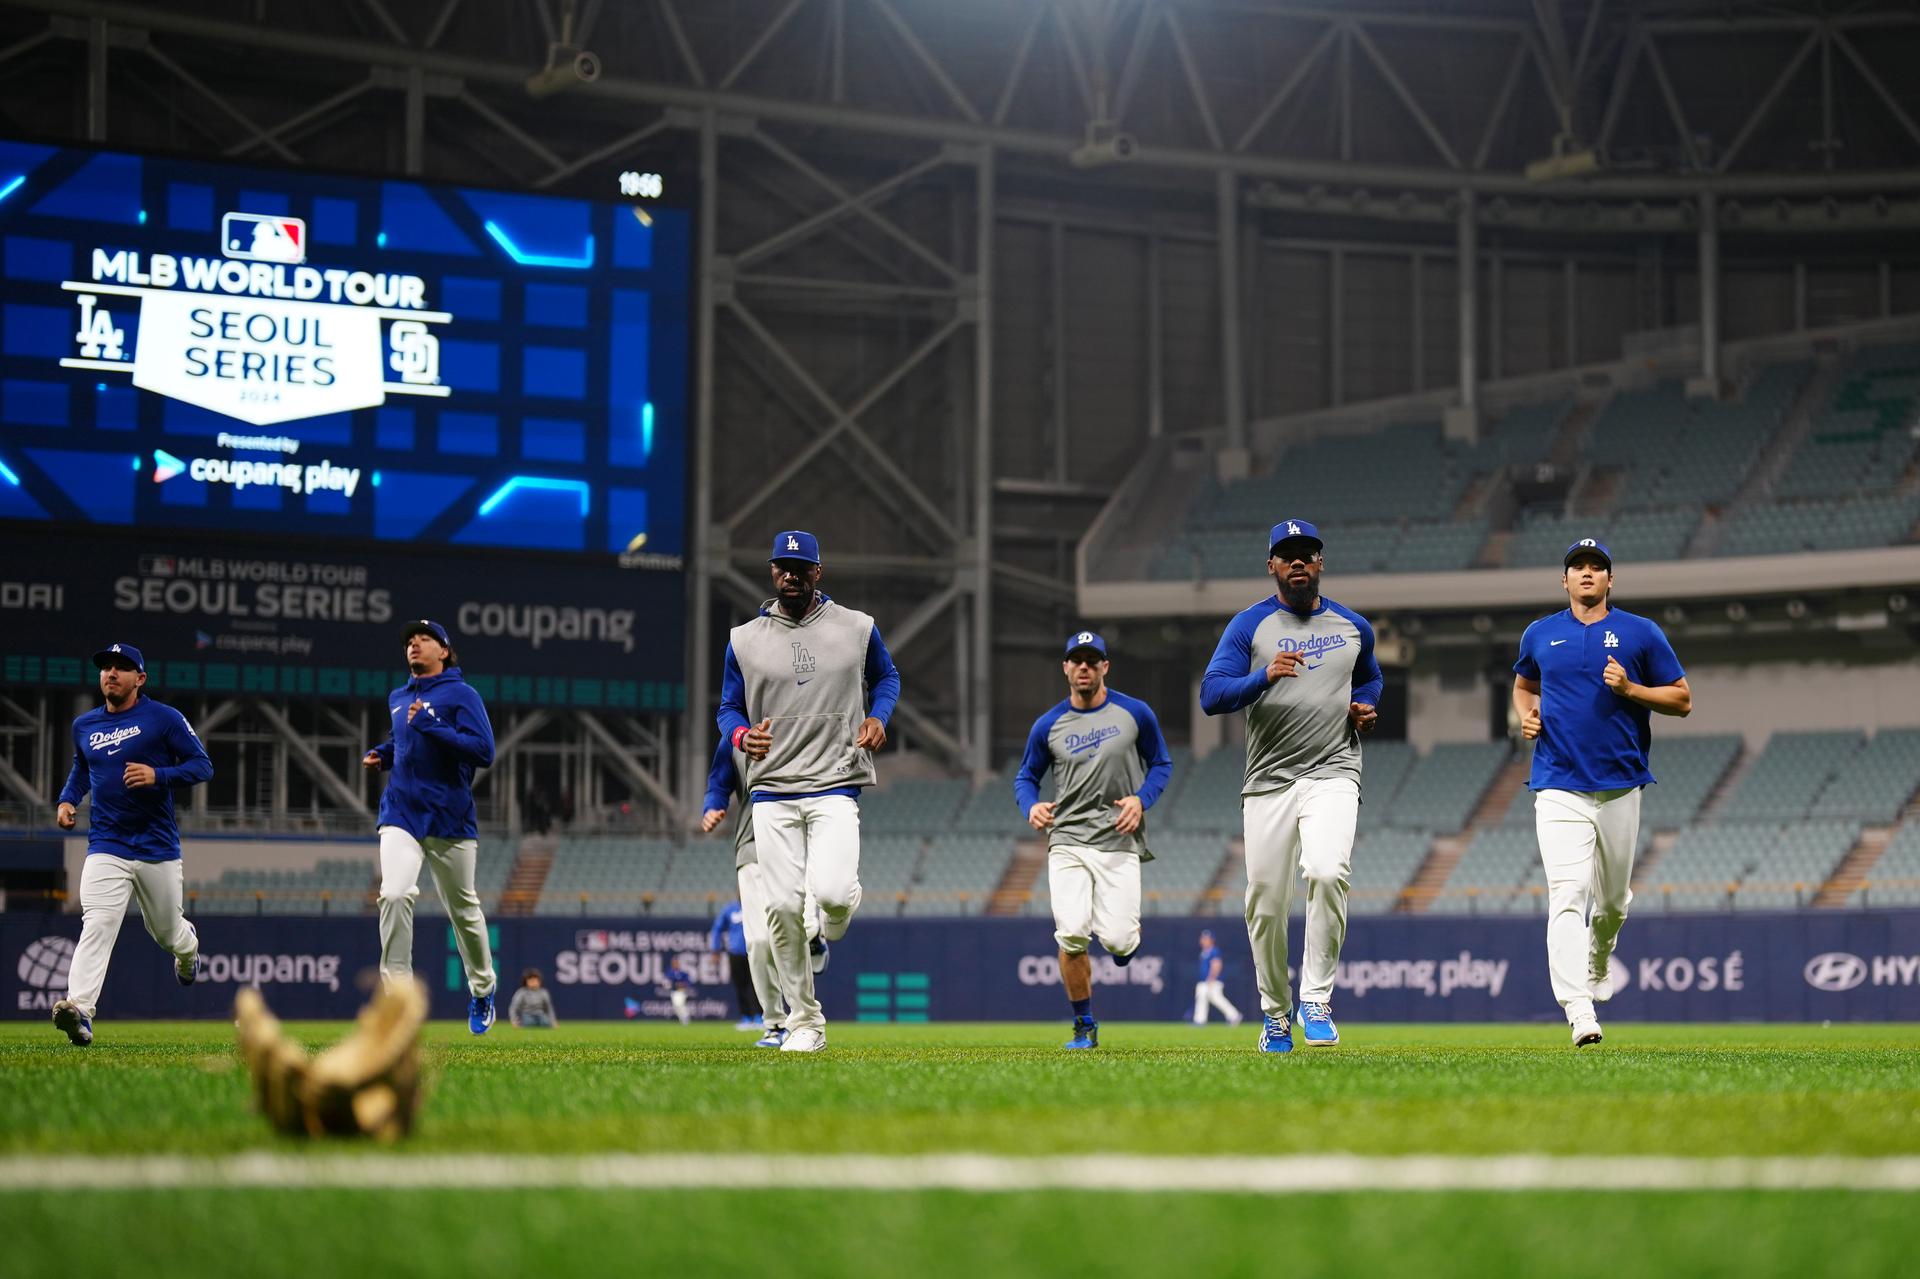 The Dodgers warming up in South Korea